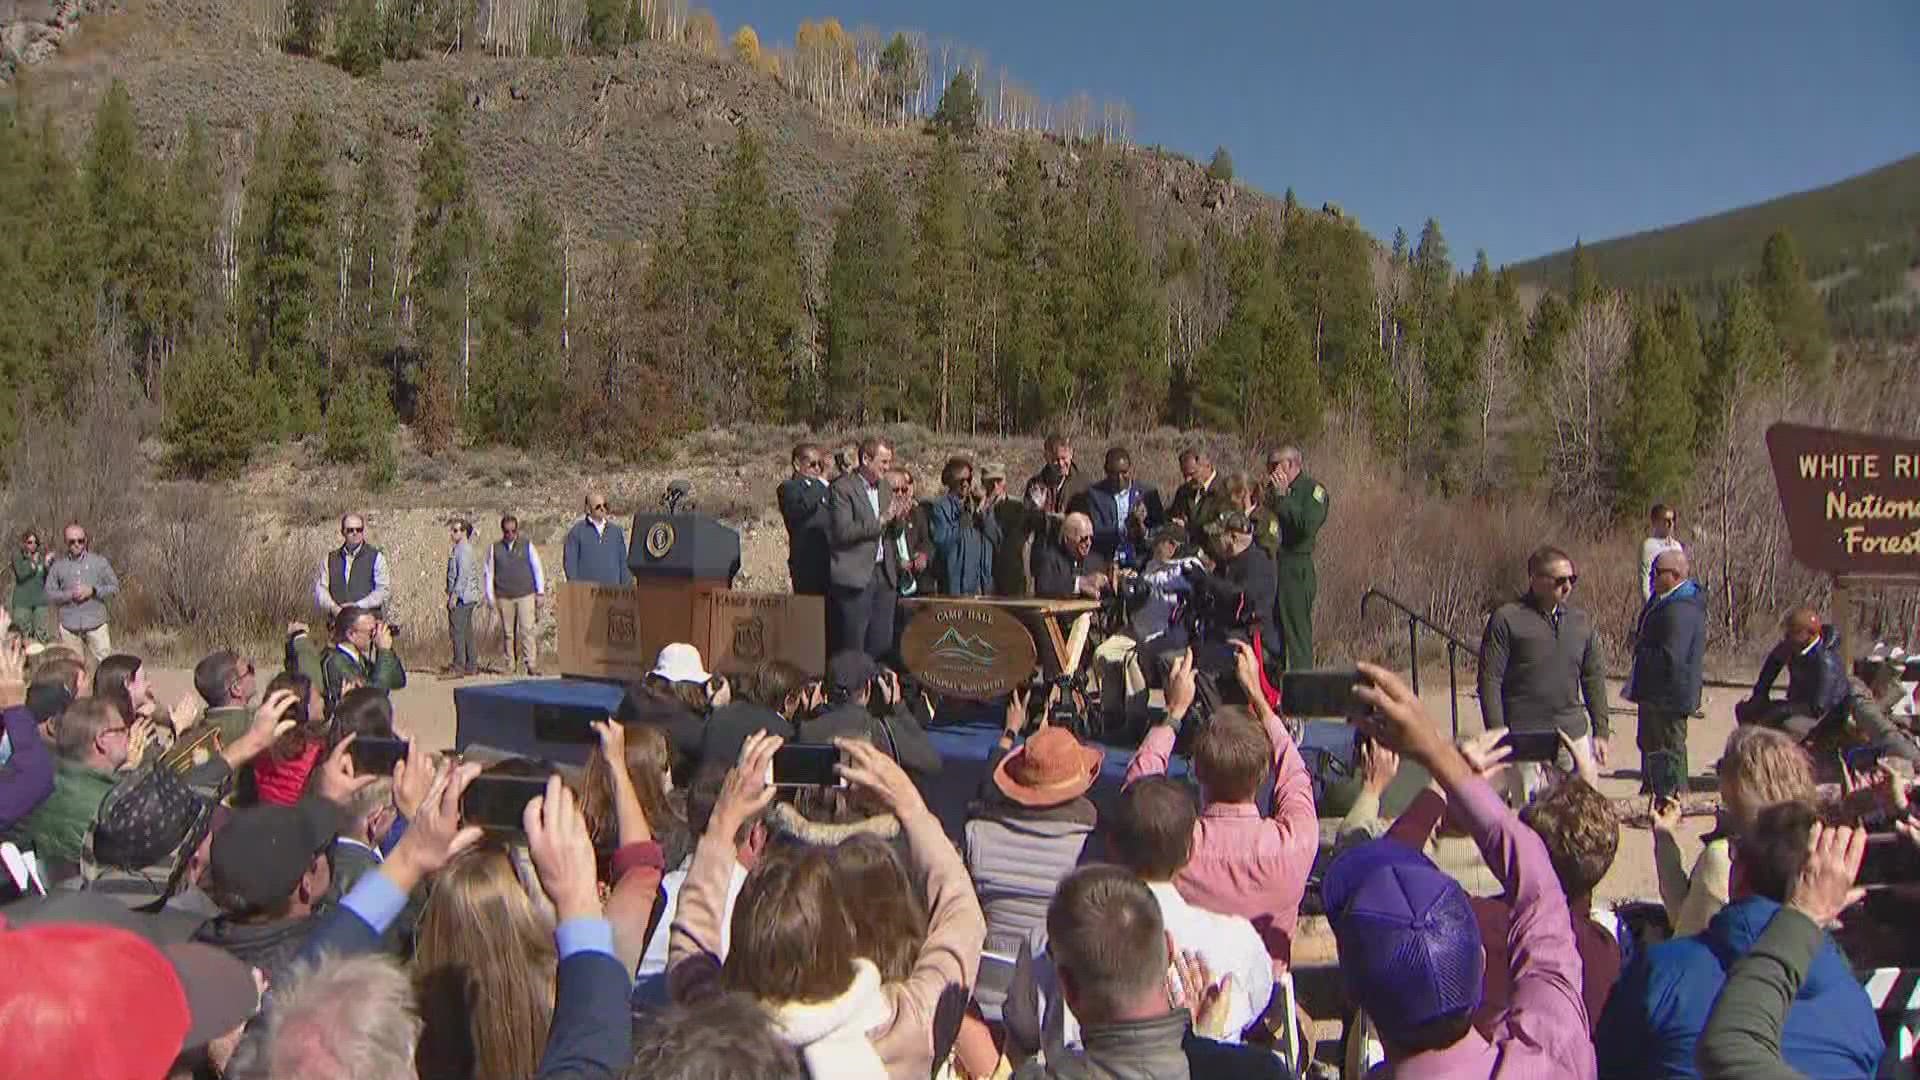 The designation of Camp Hale Continental Divide National Monument on Wednesday is the first of its kind by the Biden administration.